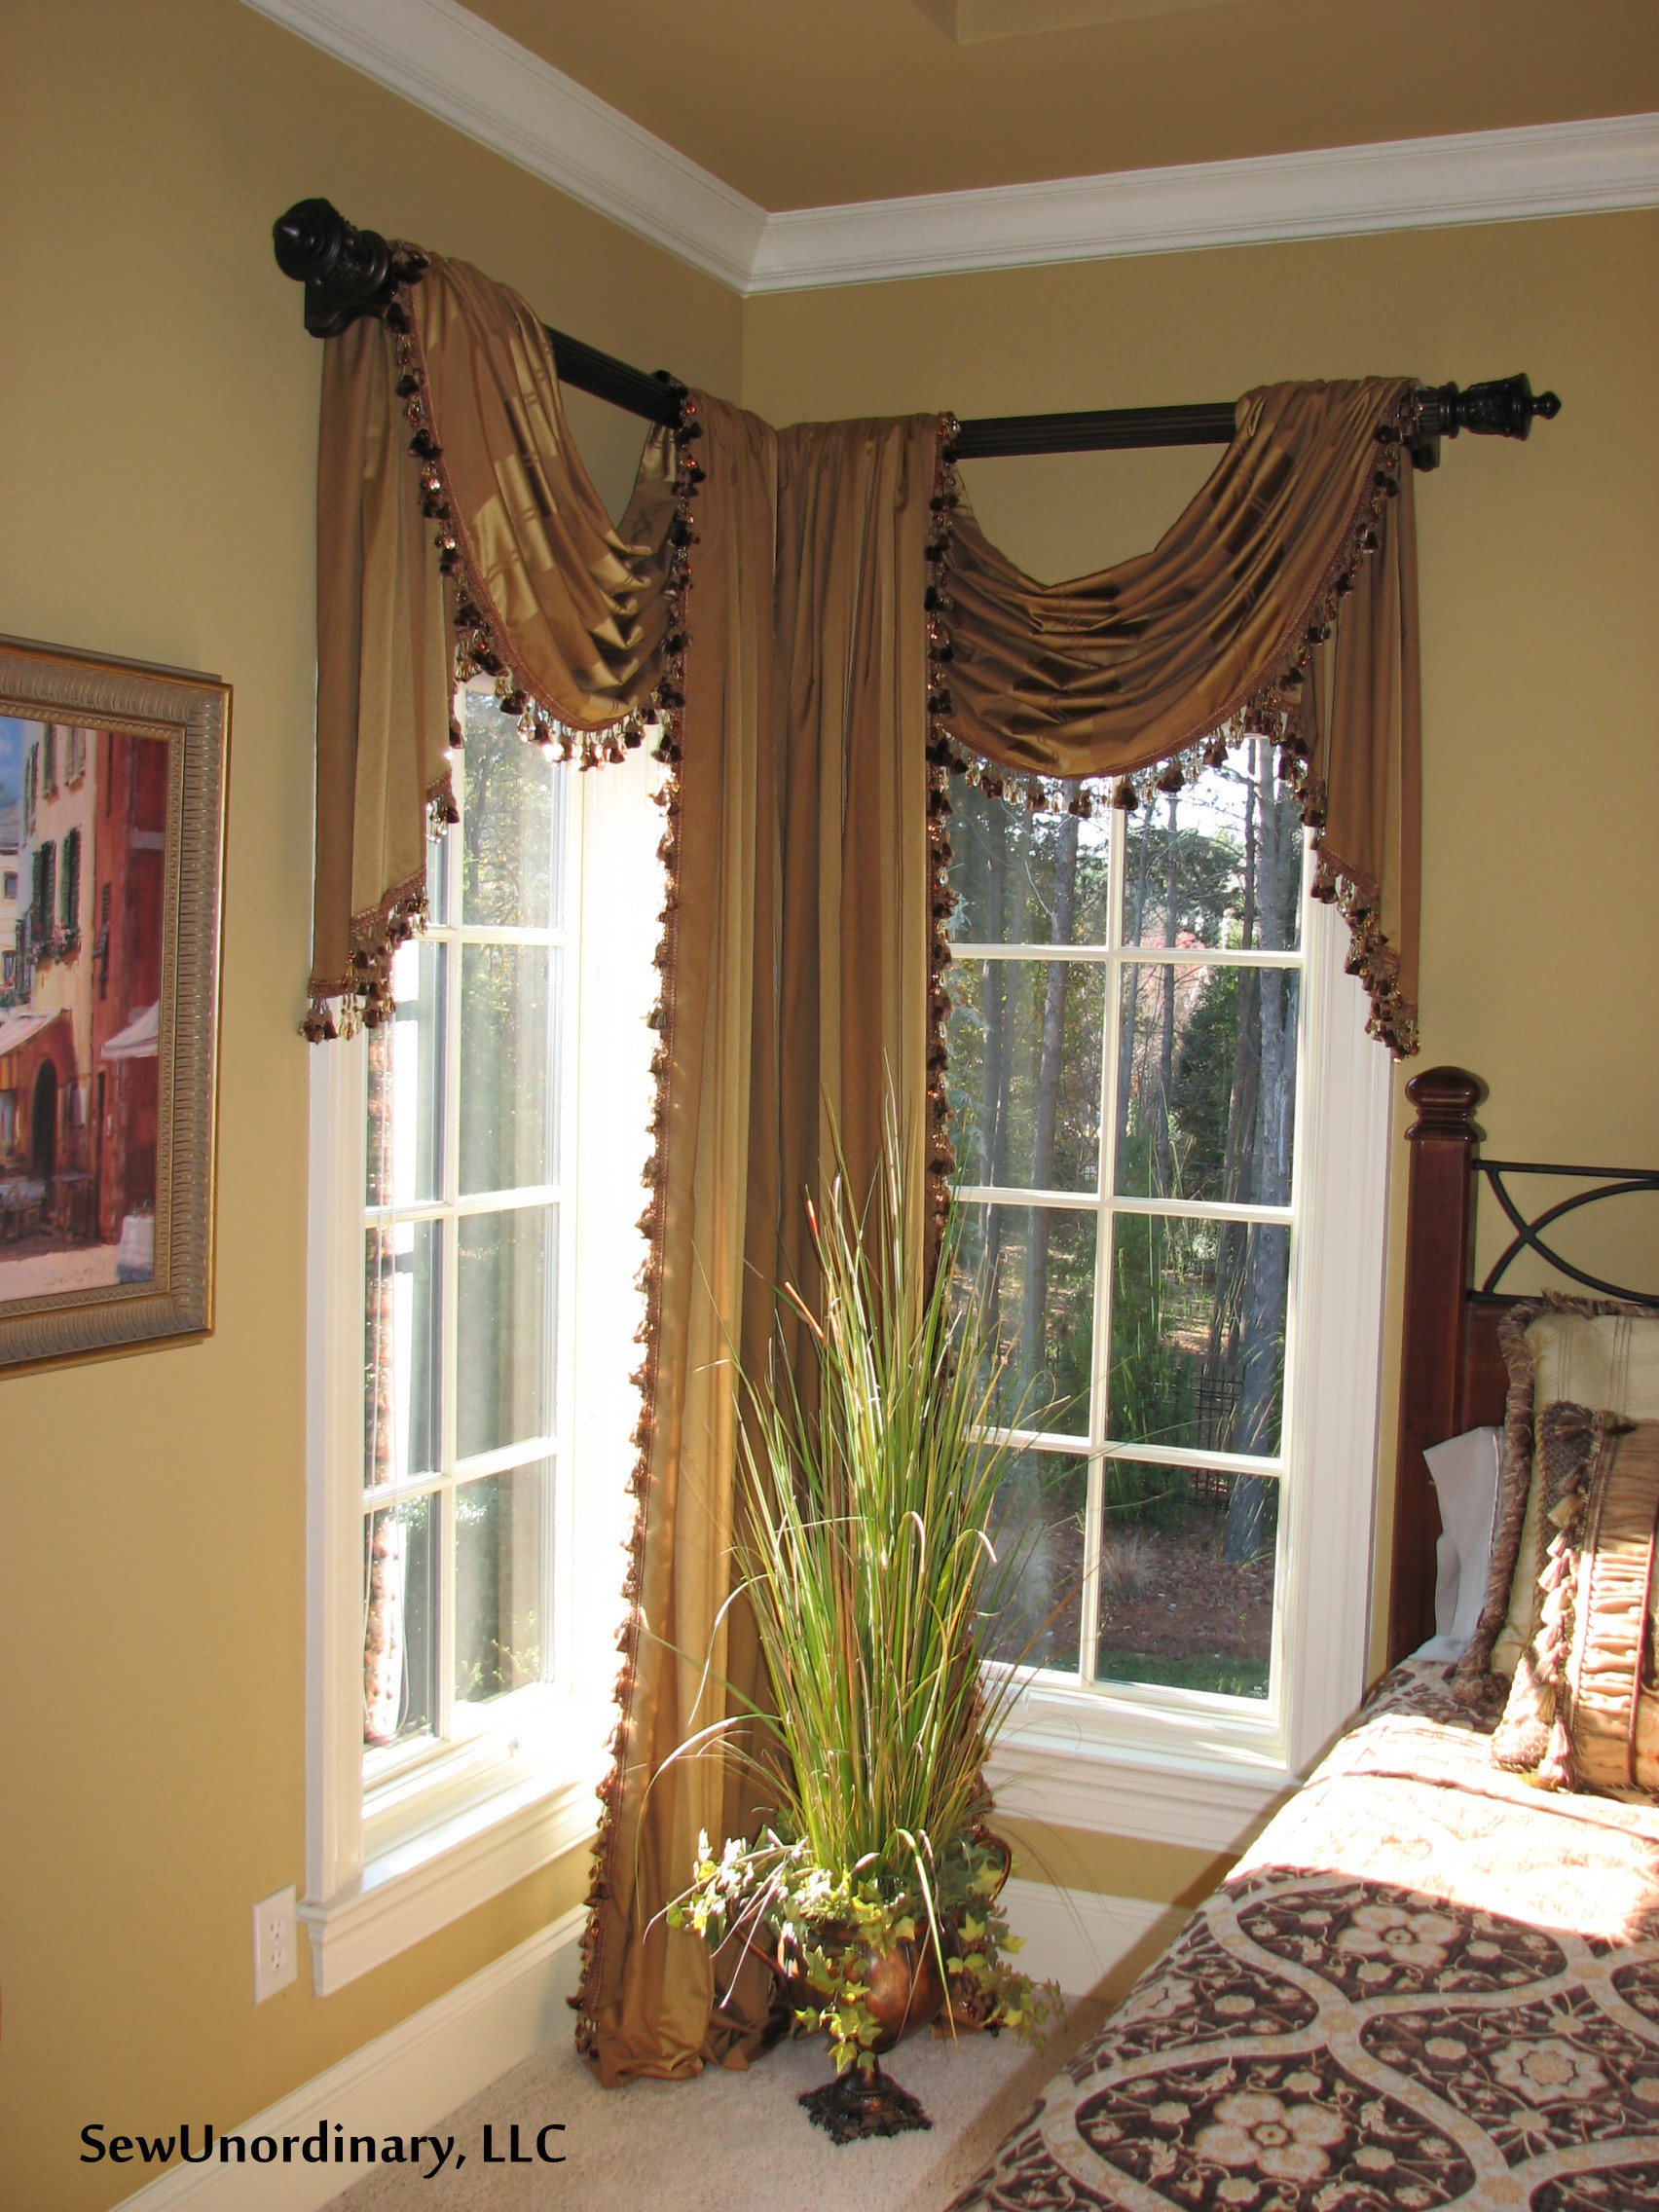 Jcpenney Living Room Curtains
 Curtain Enchanting Jcpenney Valances Curtains For Window